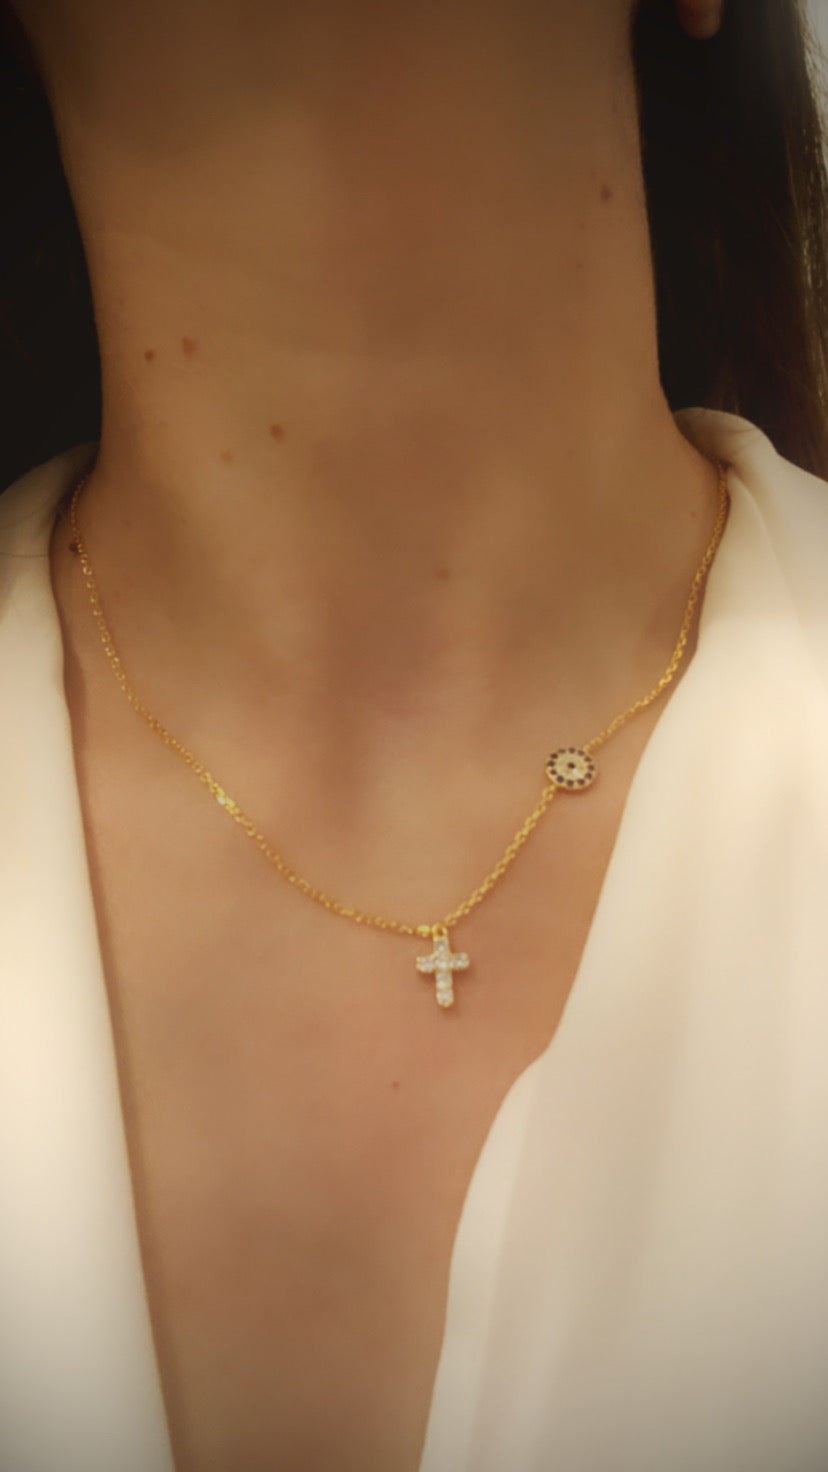 Eye and cross necklace